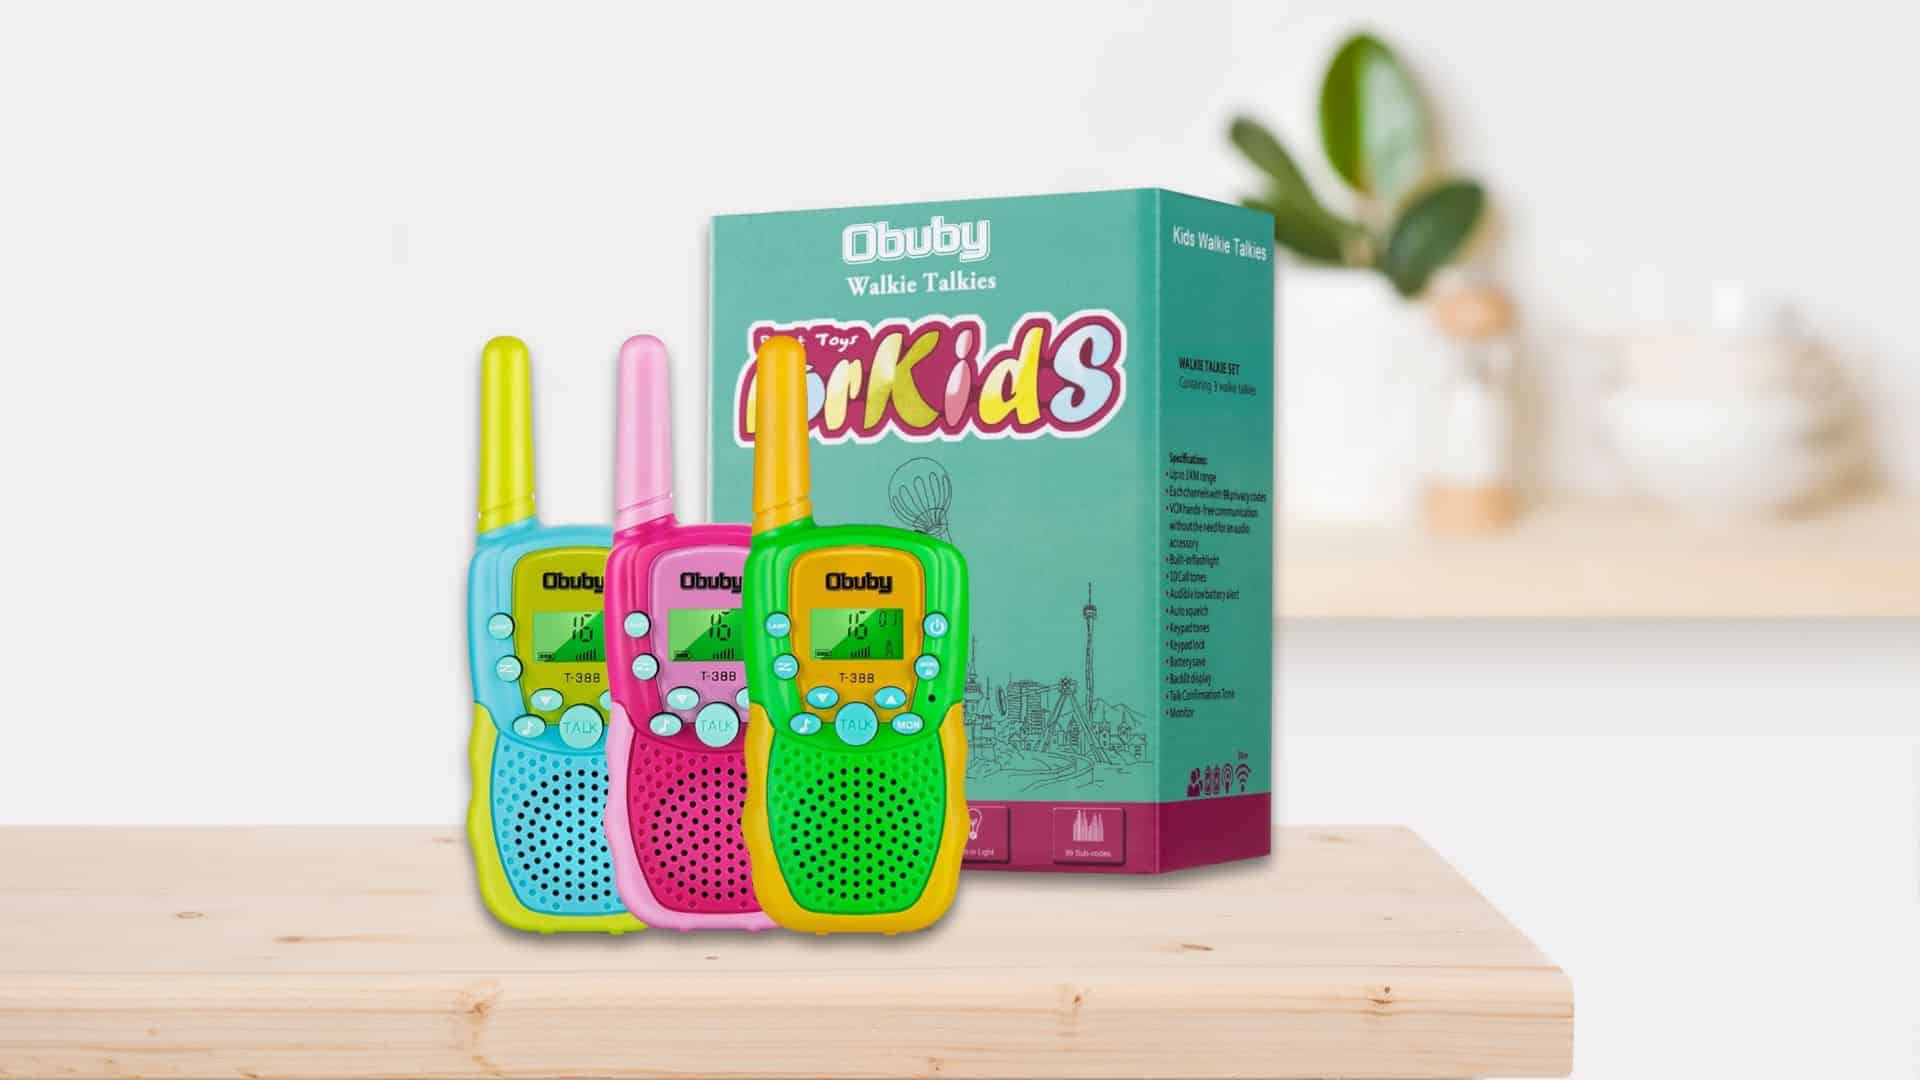 3 Obuby Walkies Talkies in front of a packaging box sitting on a counter